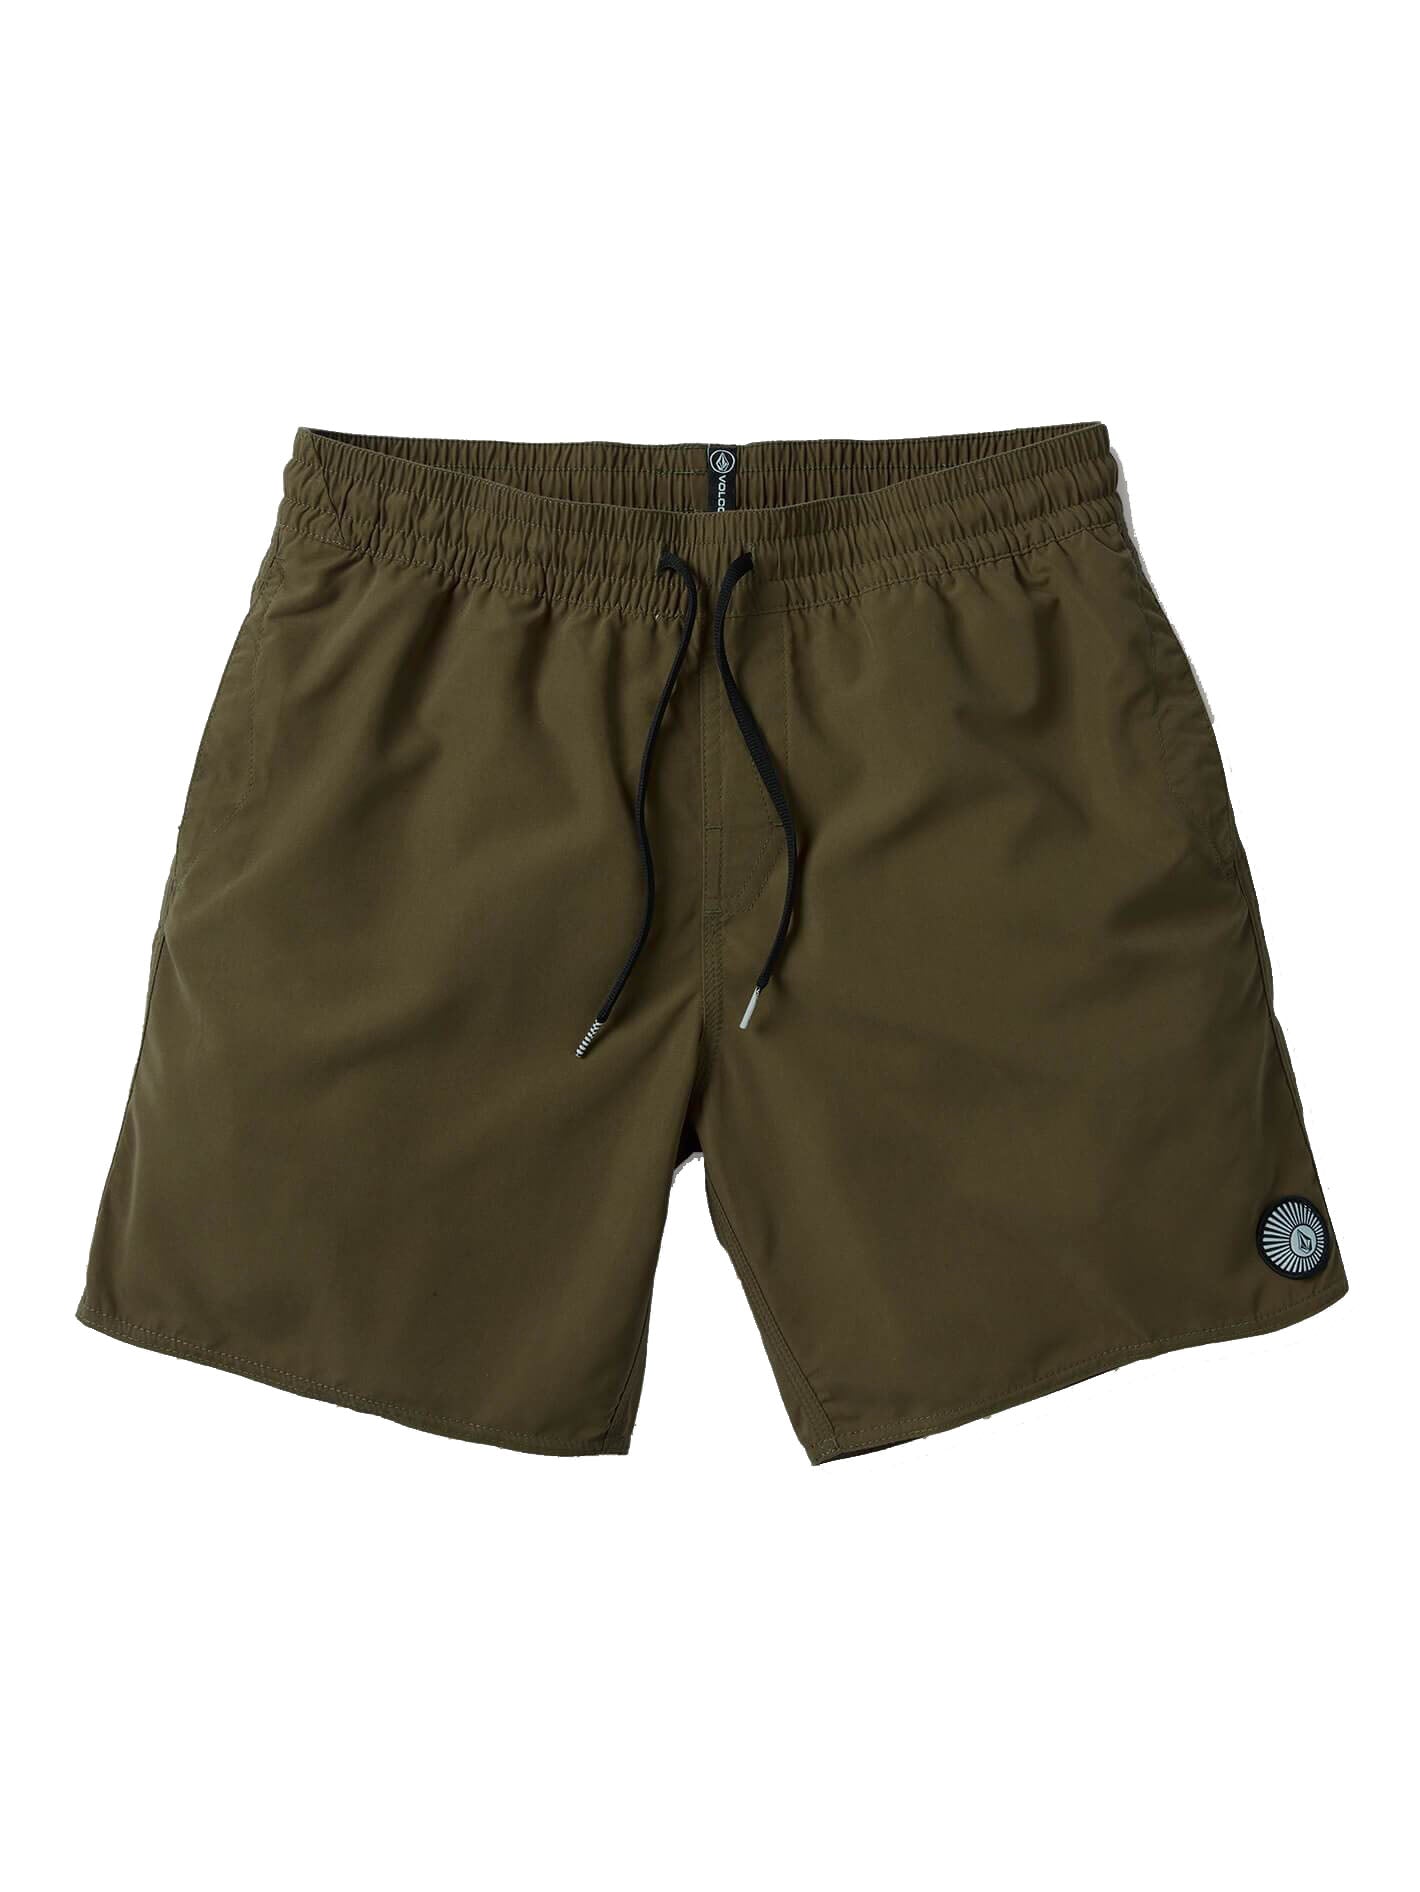 Volcom Lido Solid Trunk MIL-Military M